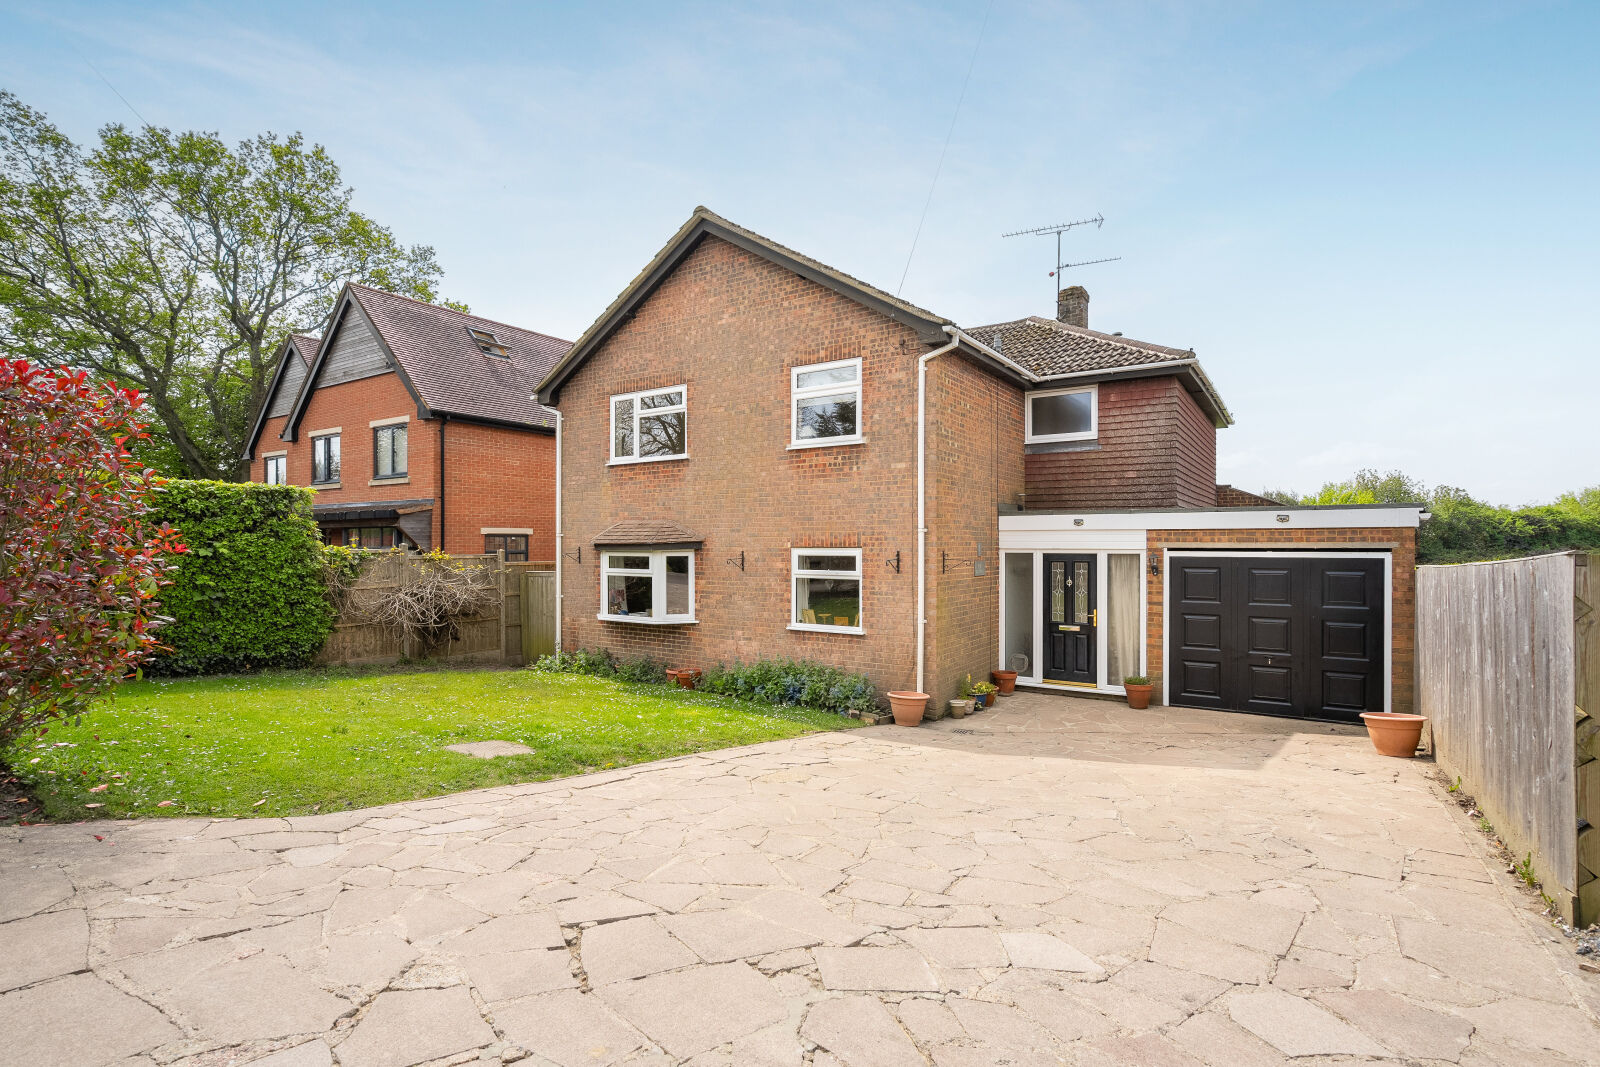 4 bedroom detached house for sale Chiltern View Close, Lacey Green, HP27, main image